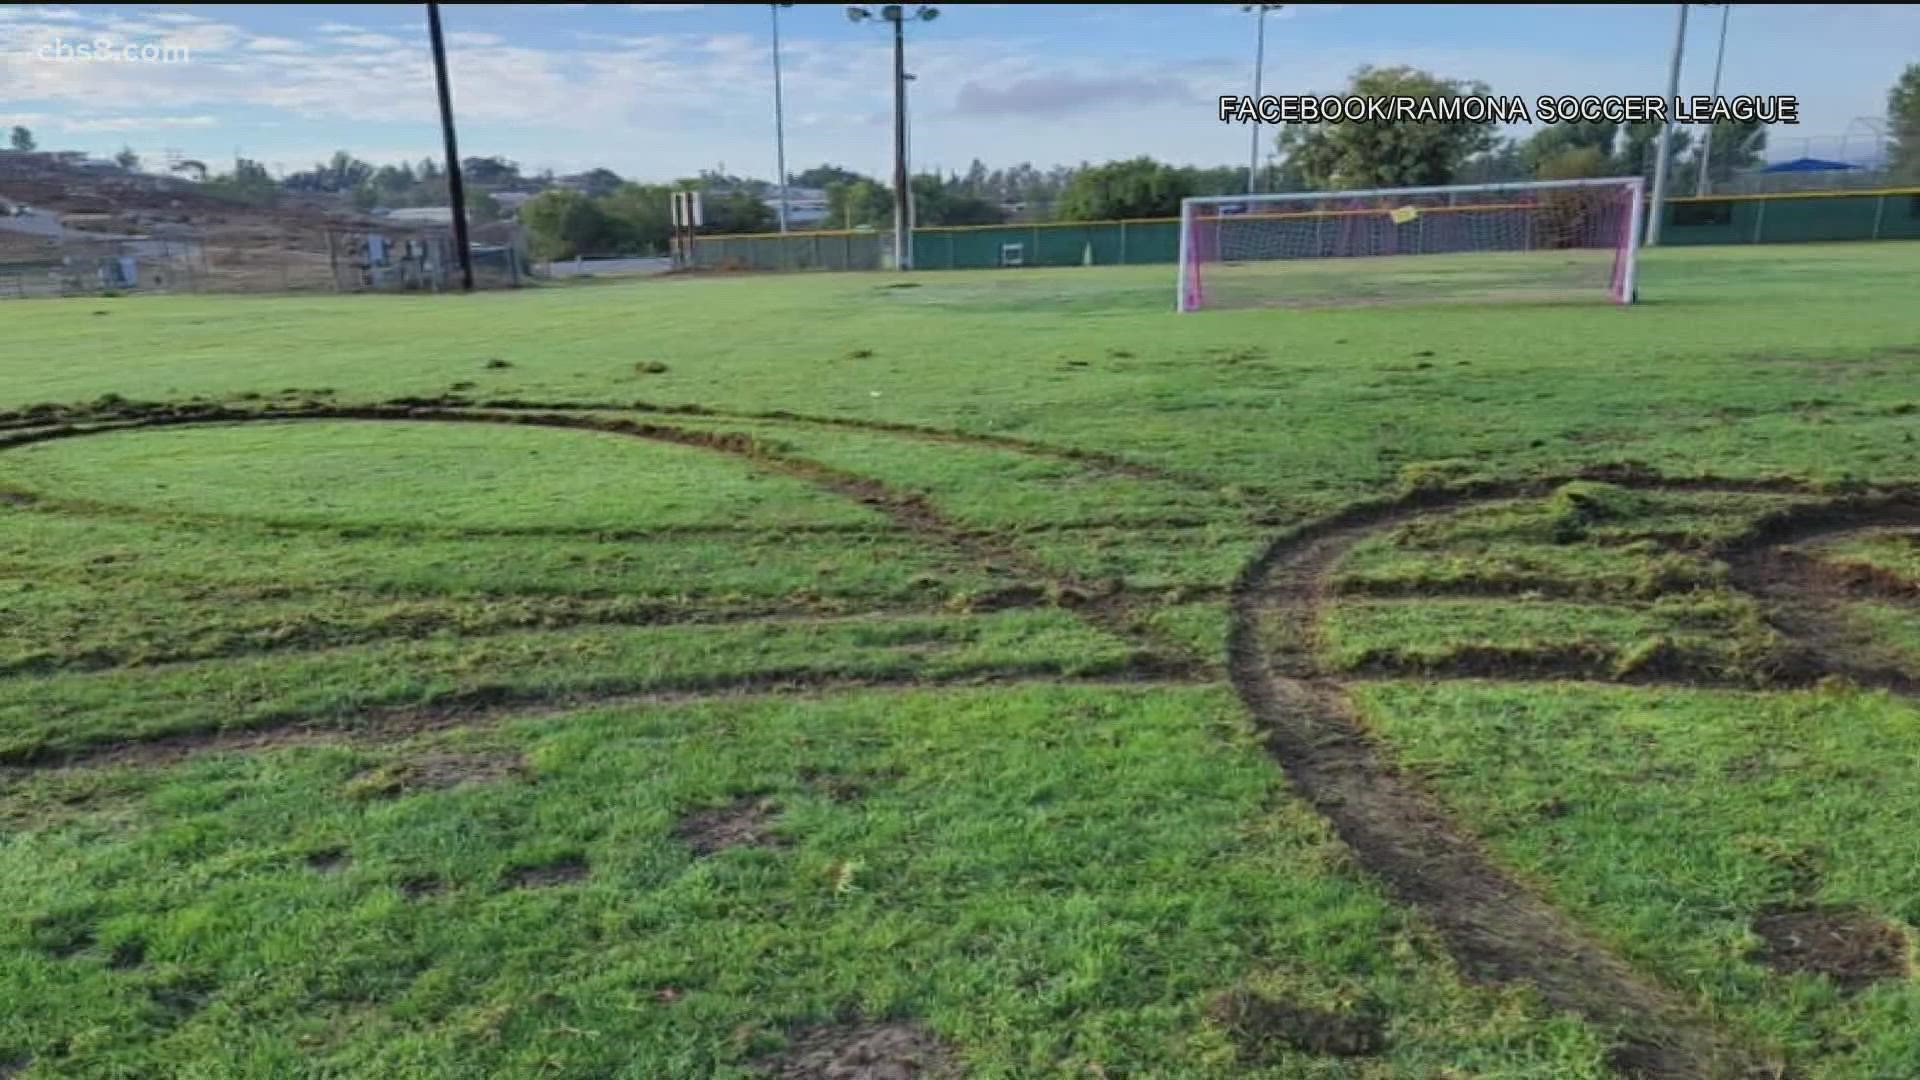 The Ramona Soccer League posted images of what look like tire tracks to their Facebook page Saturday morning.